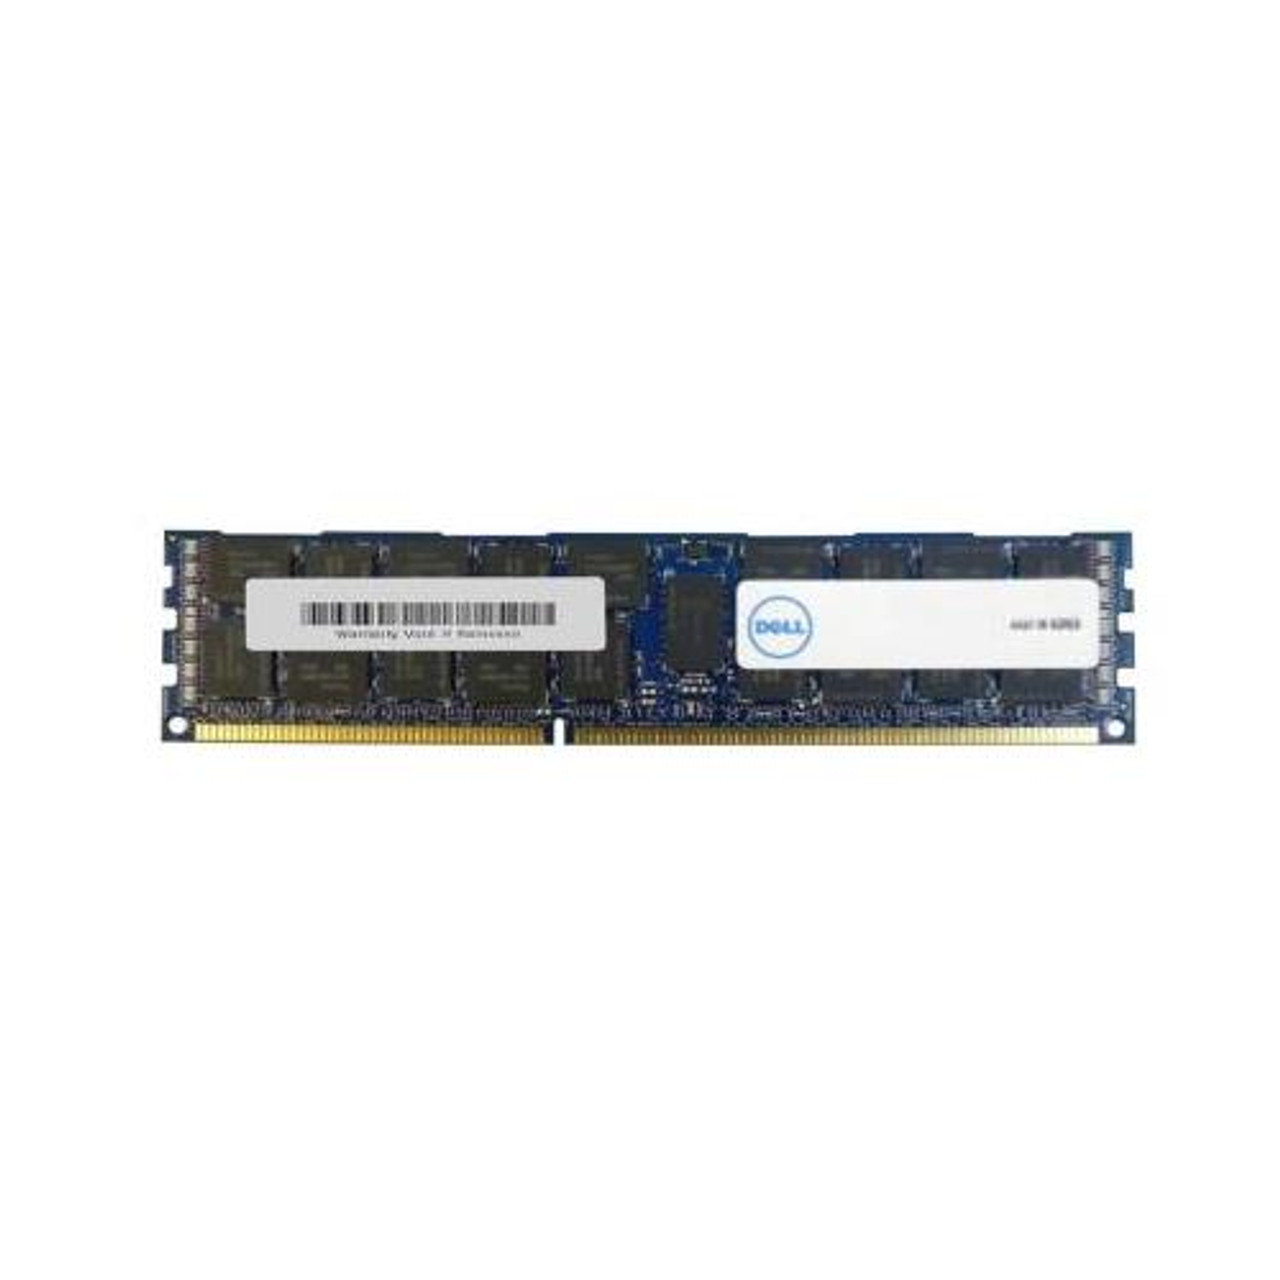 0RVY55 Dell 8GB PC3-12800 DDR3-1600MHz ECC Registered CL11 240-Pin DIMM 1.35V Low Voltage Dual Rank Memory Module